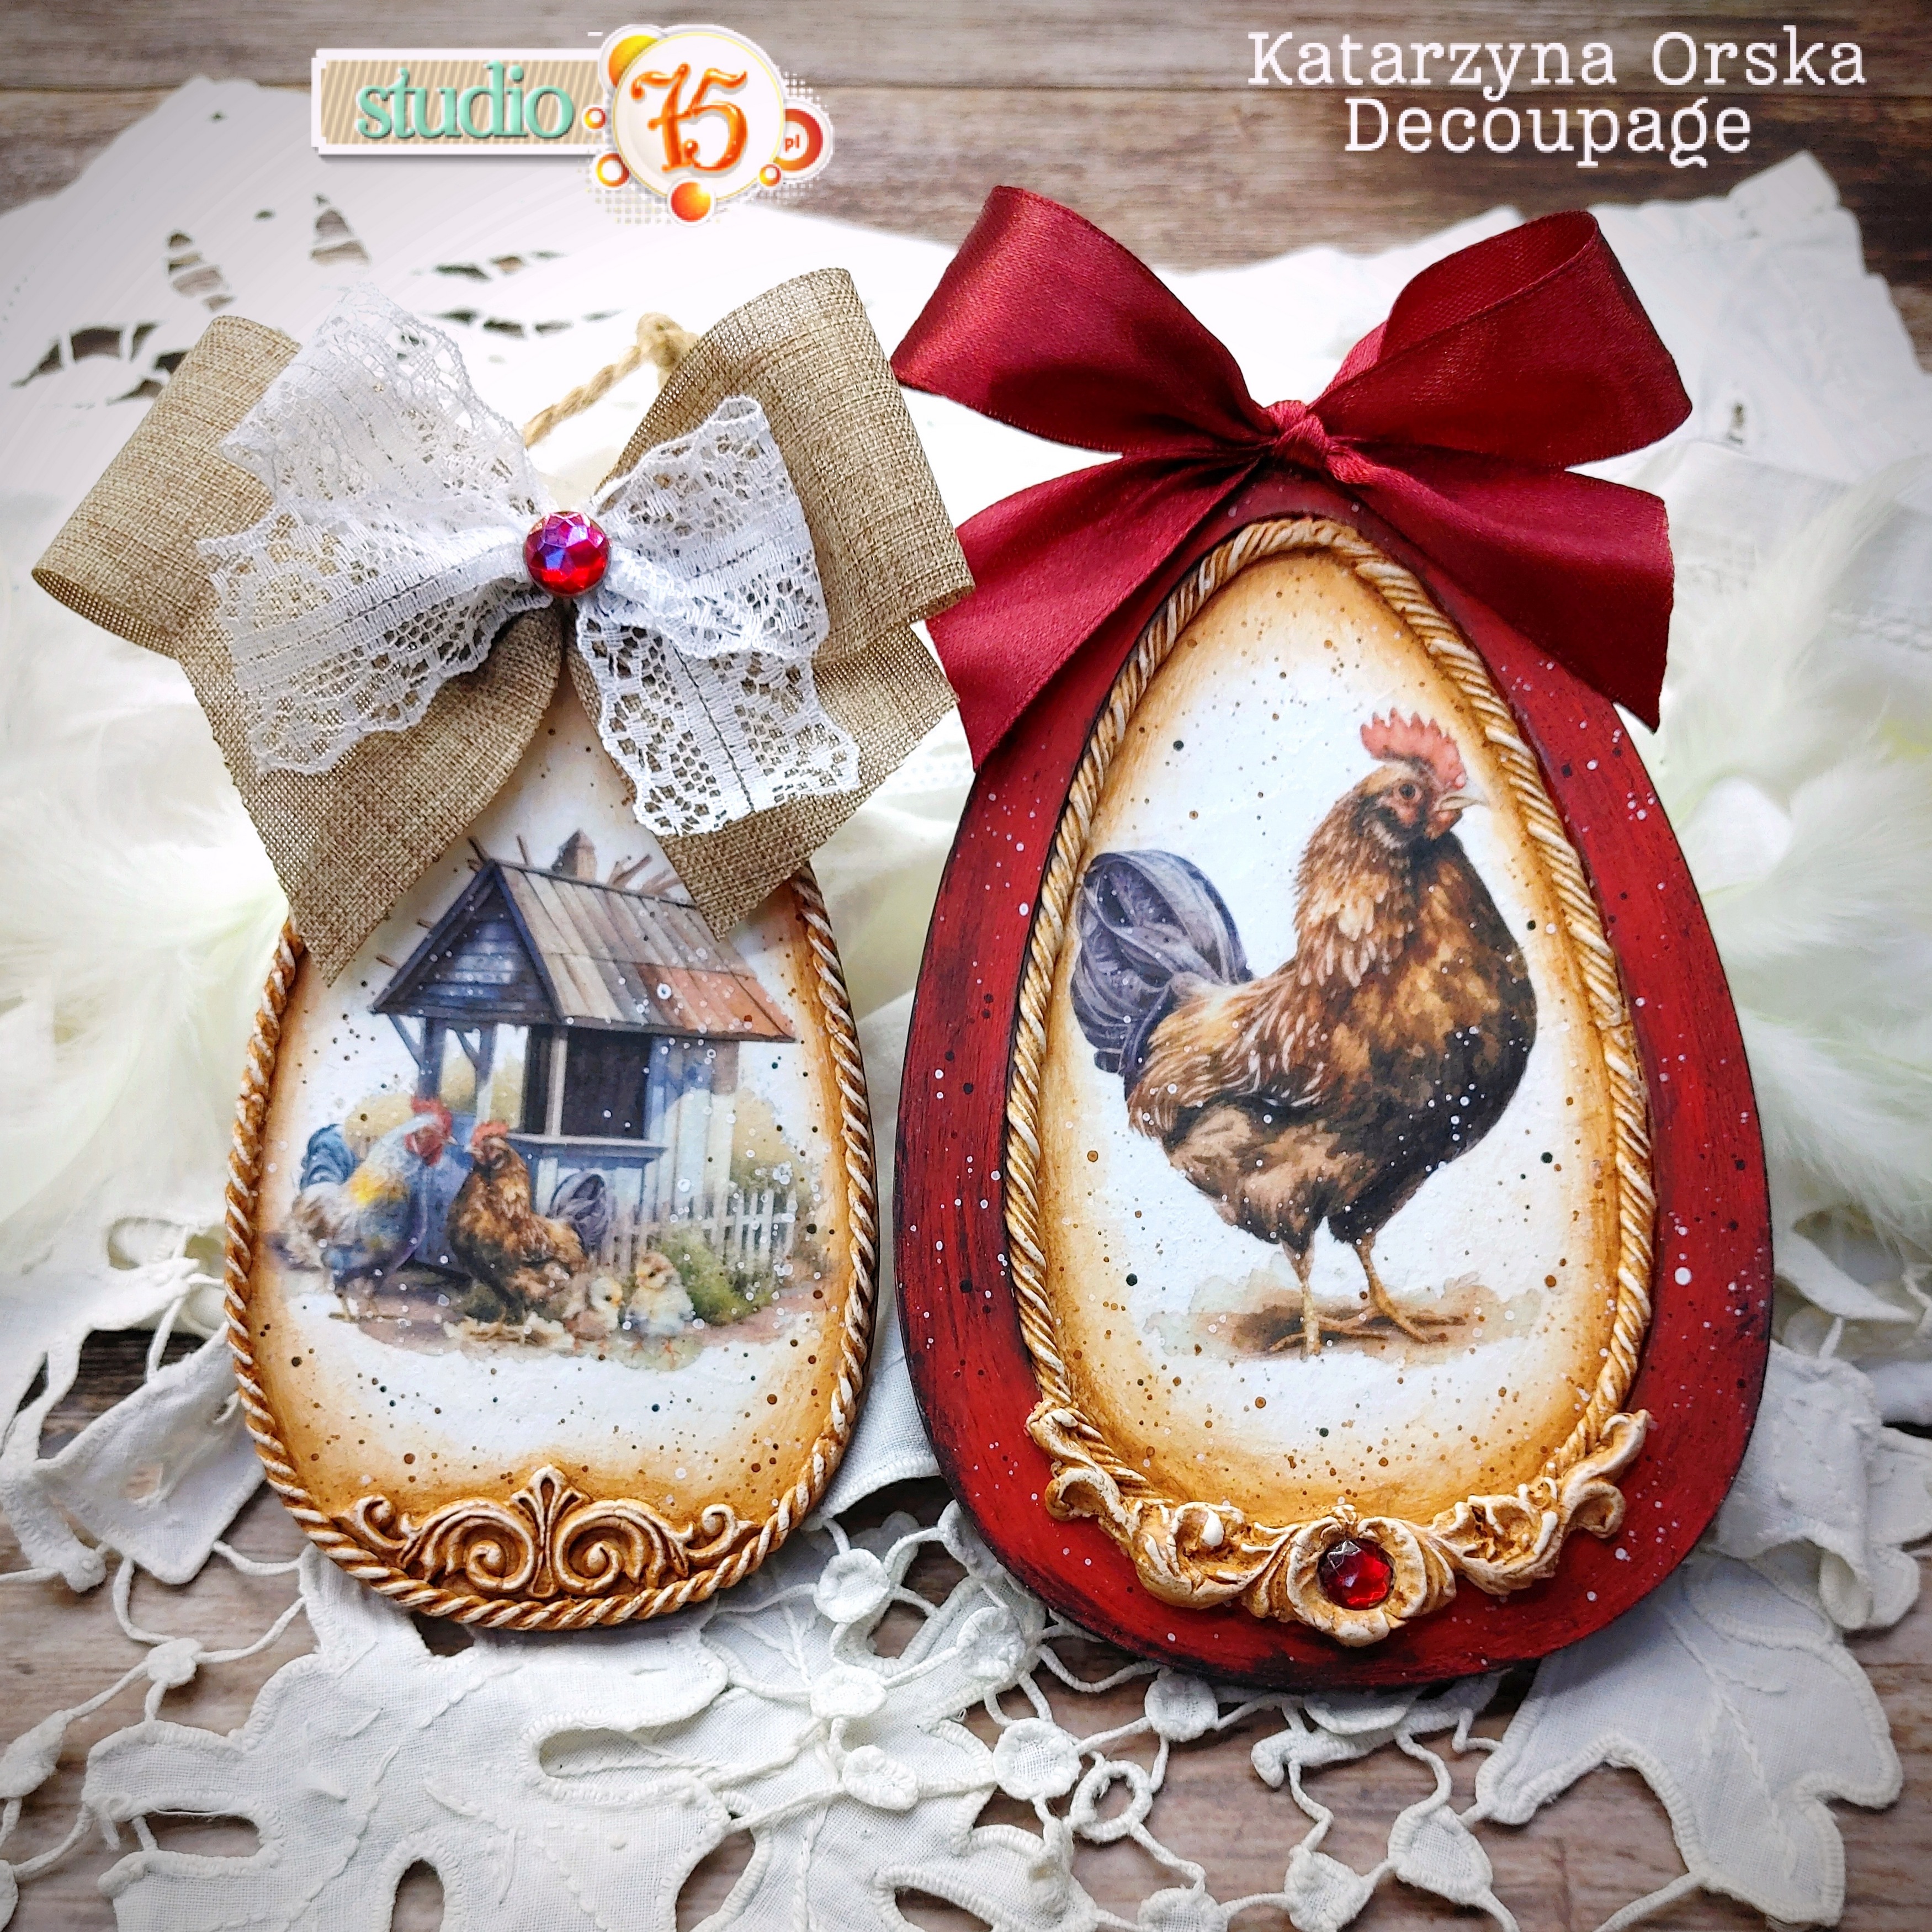 Rustic Easter Hanging Eggs with Hens